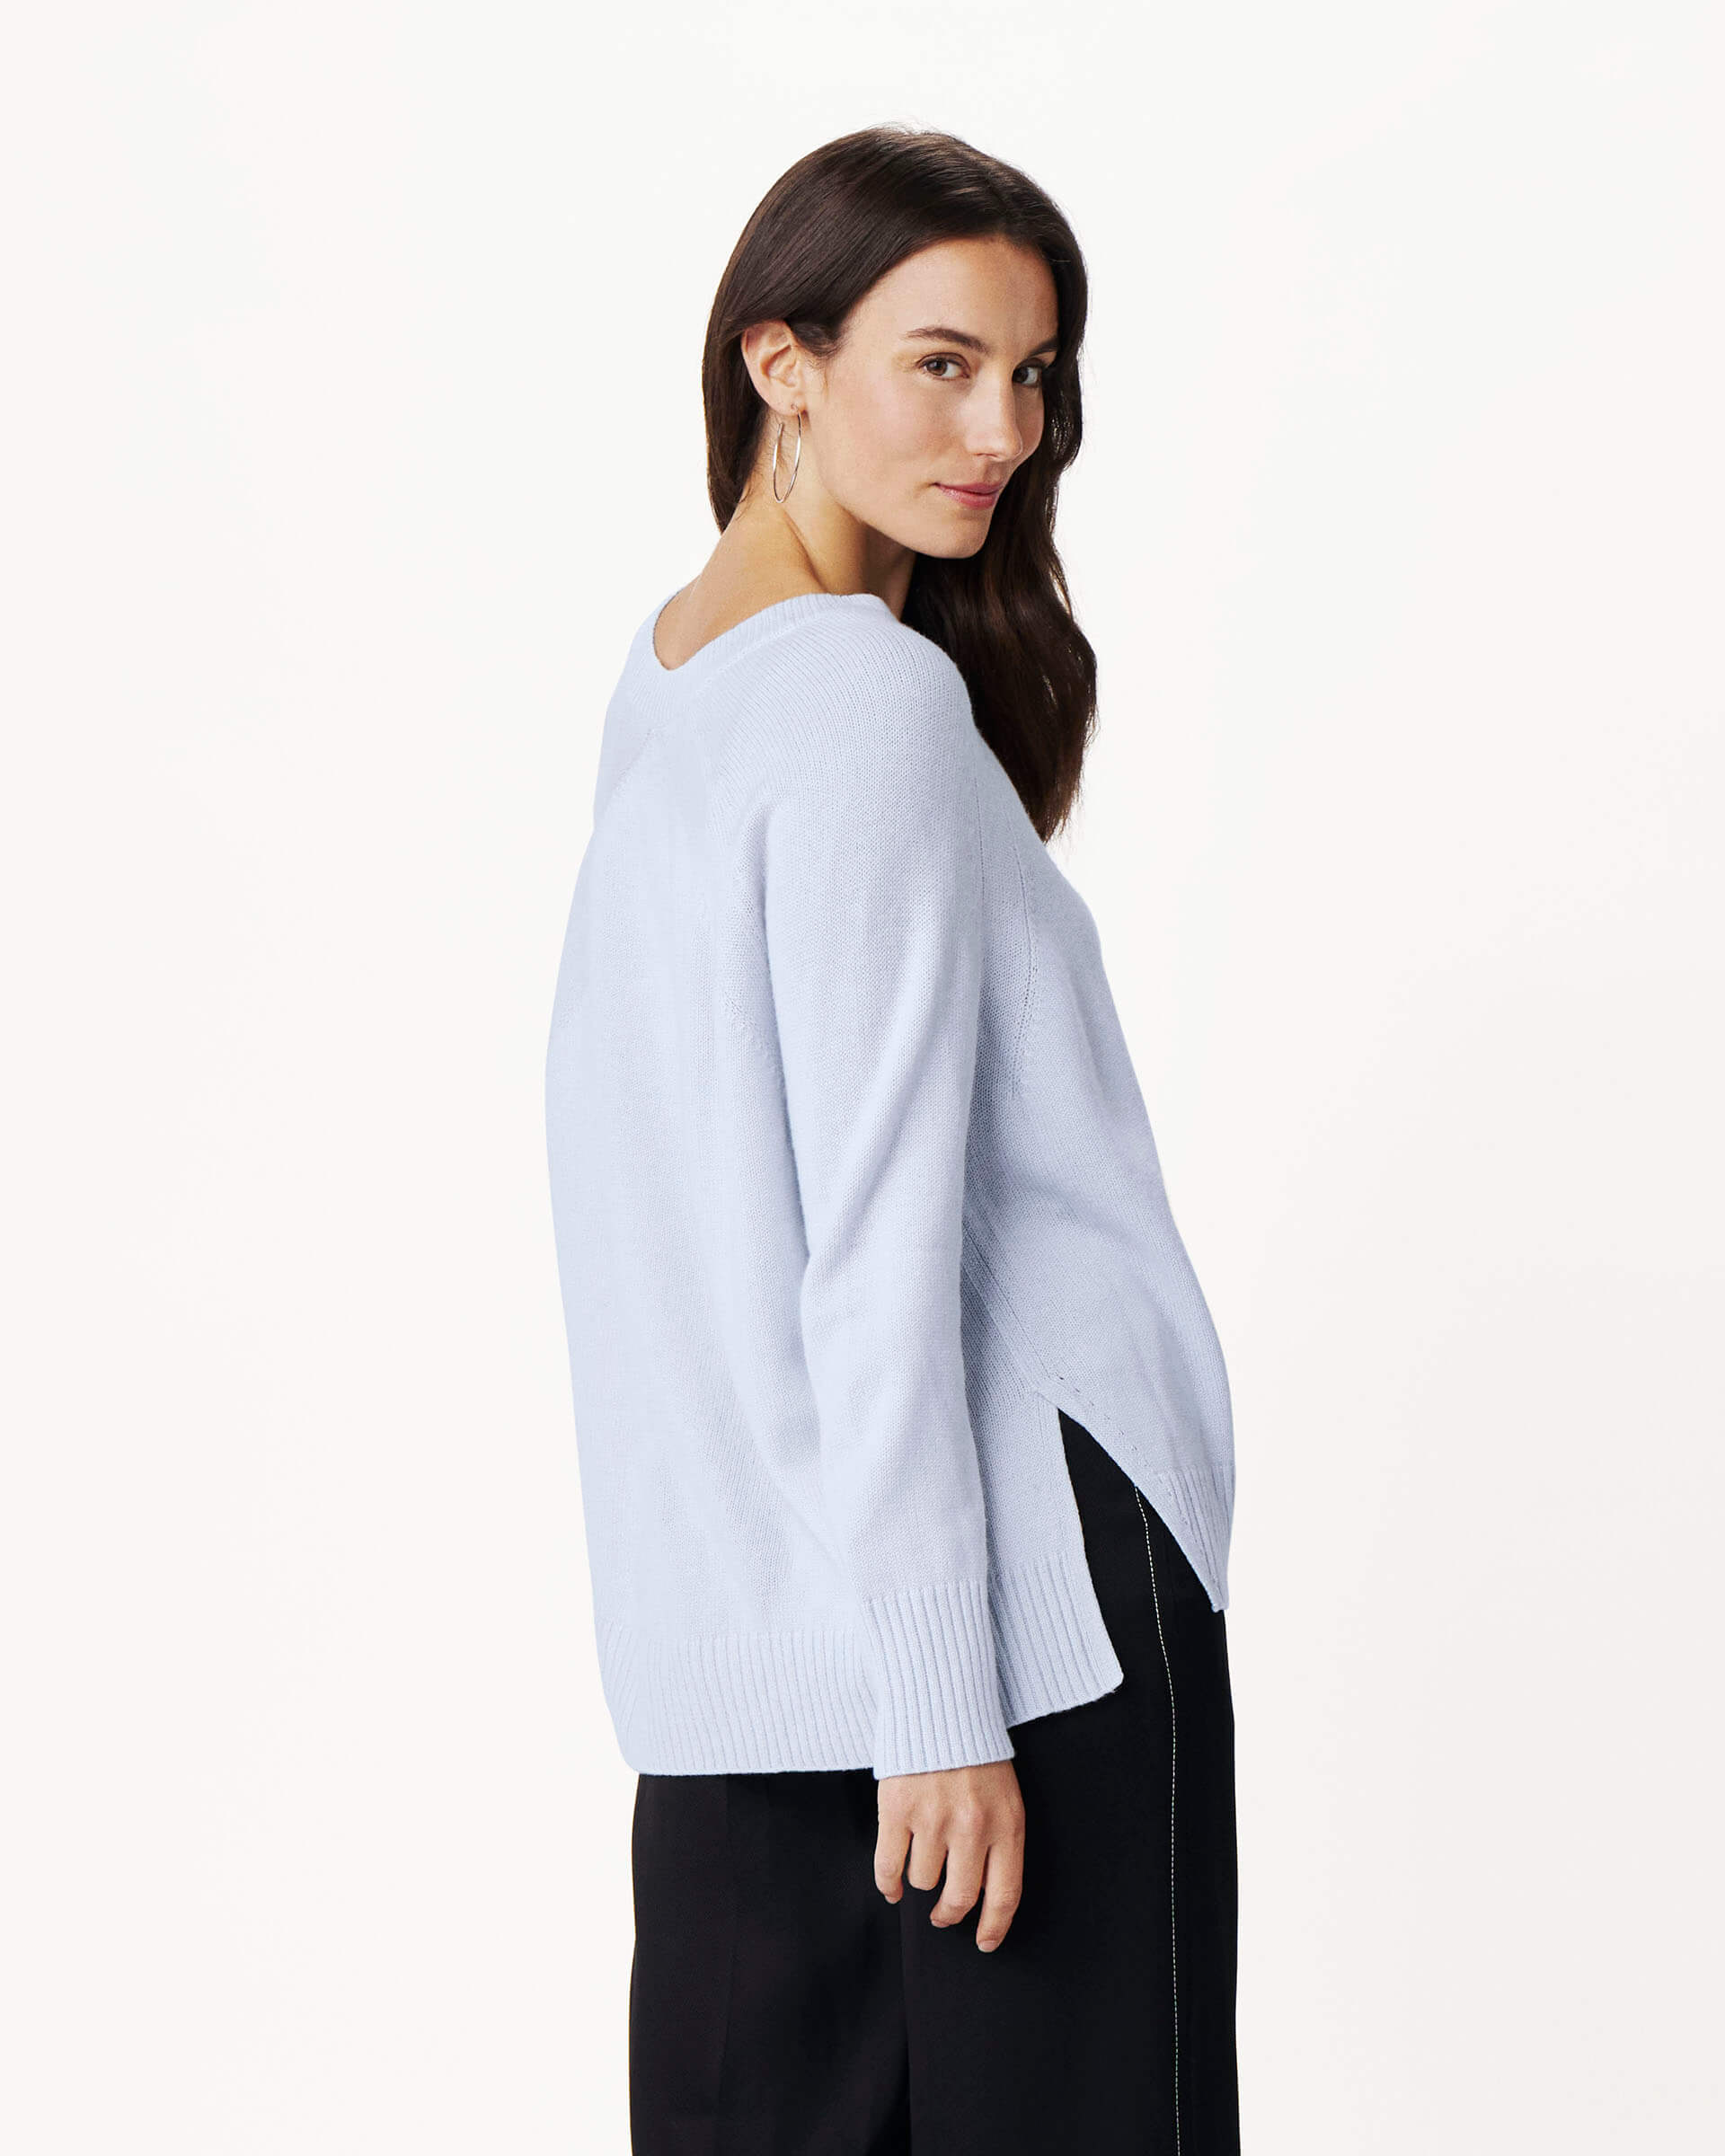 side view of woman wearing mersea banff cashmere sweater in icy blue color